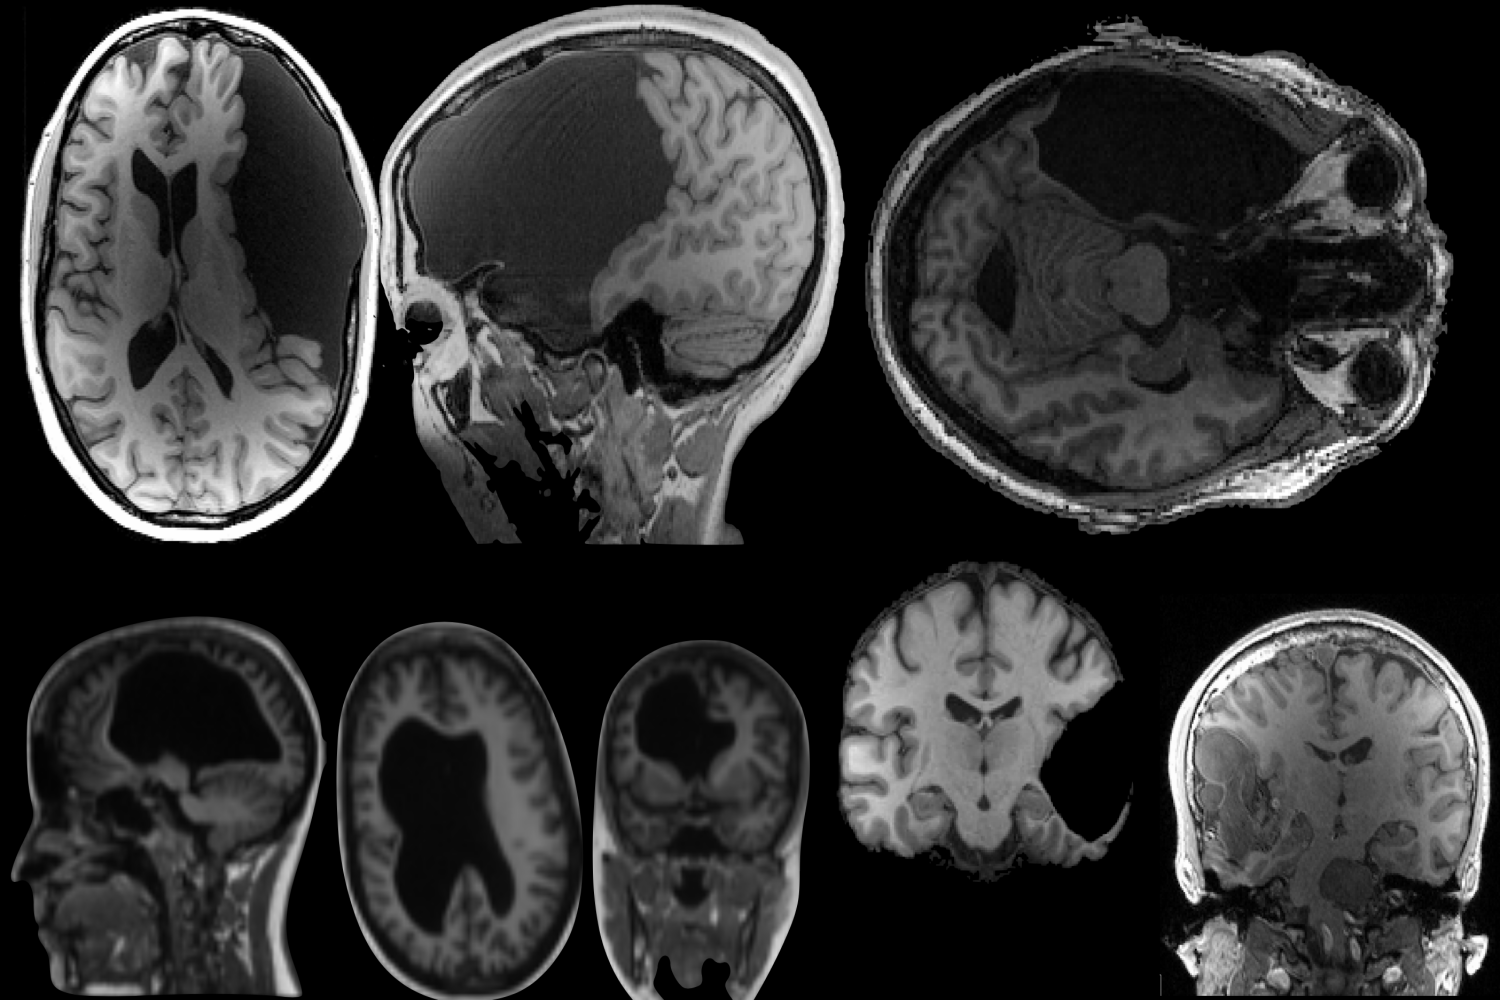 A collection of anatomical MRIs from the Interesting Brains project